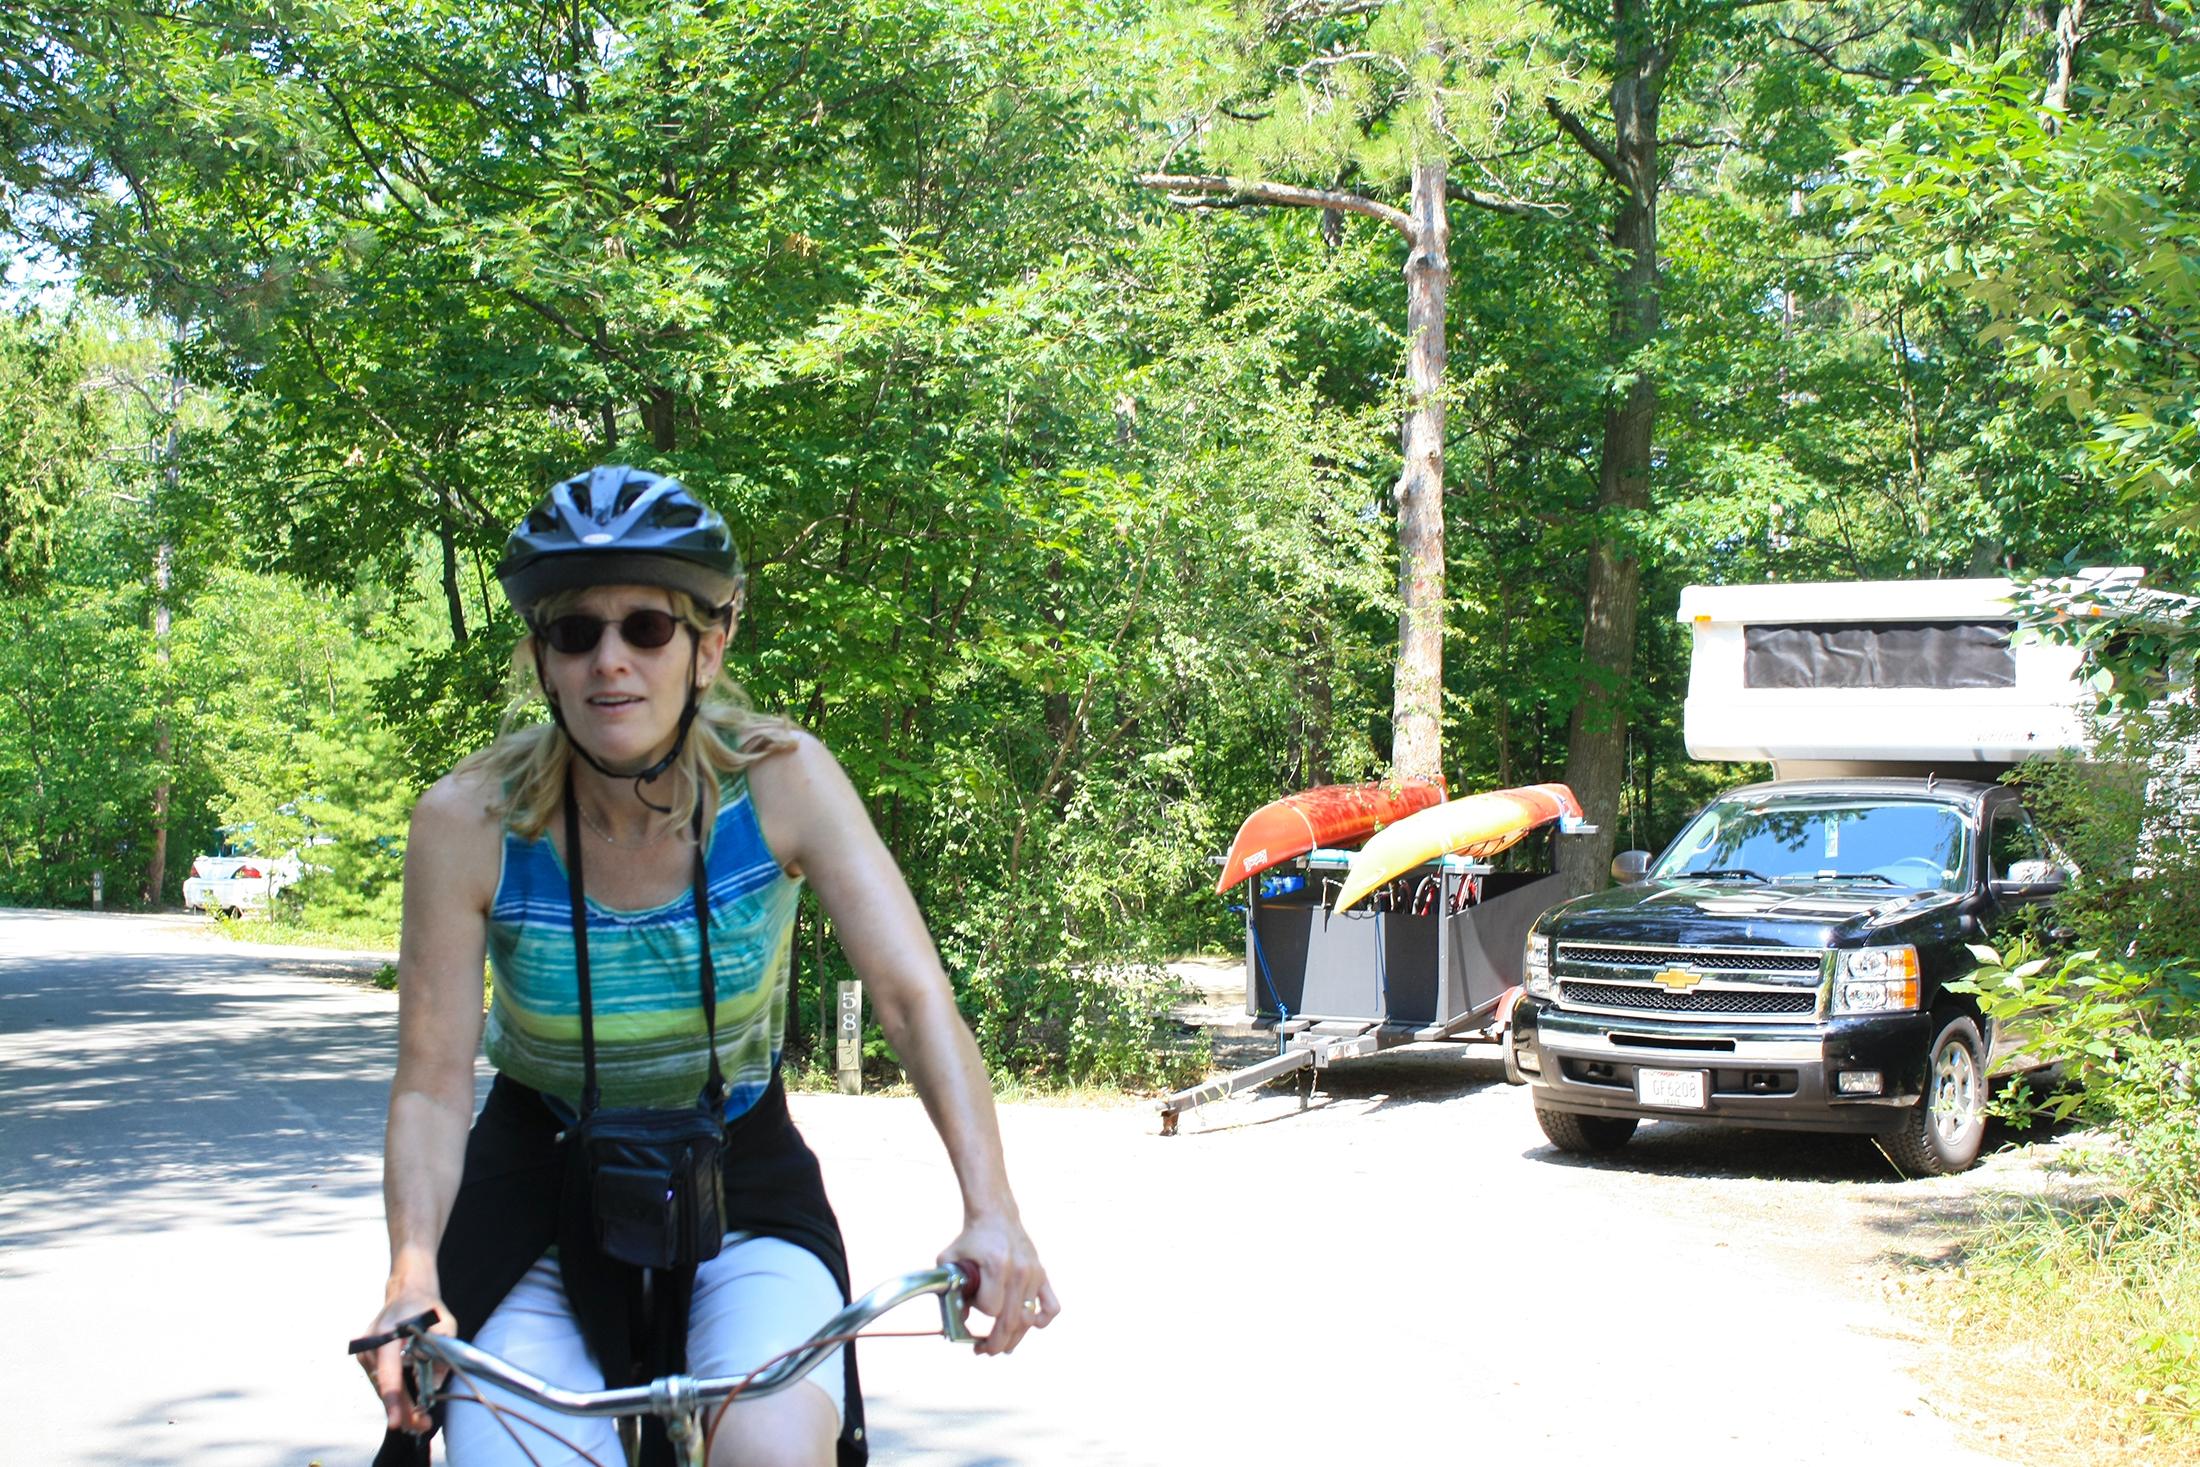 Woman on bike riding by a campsite.